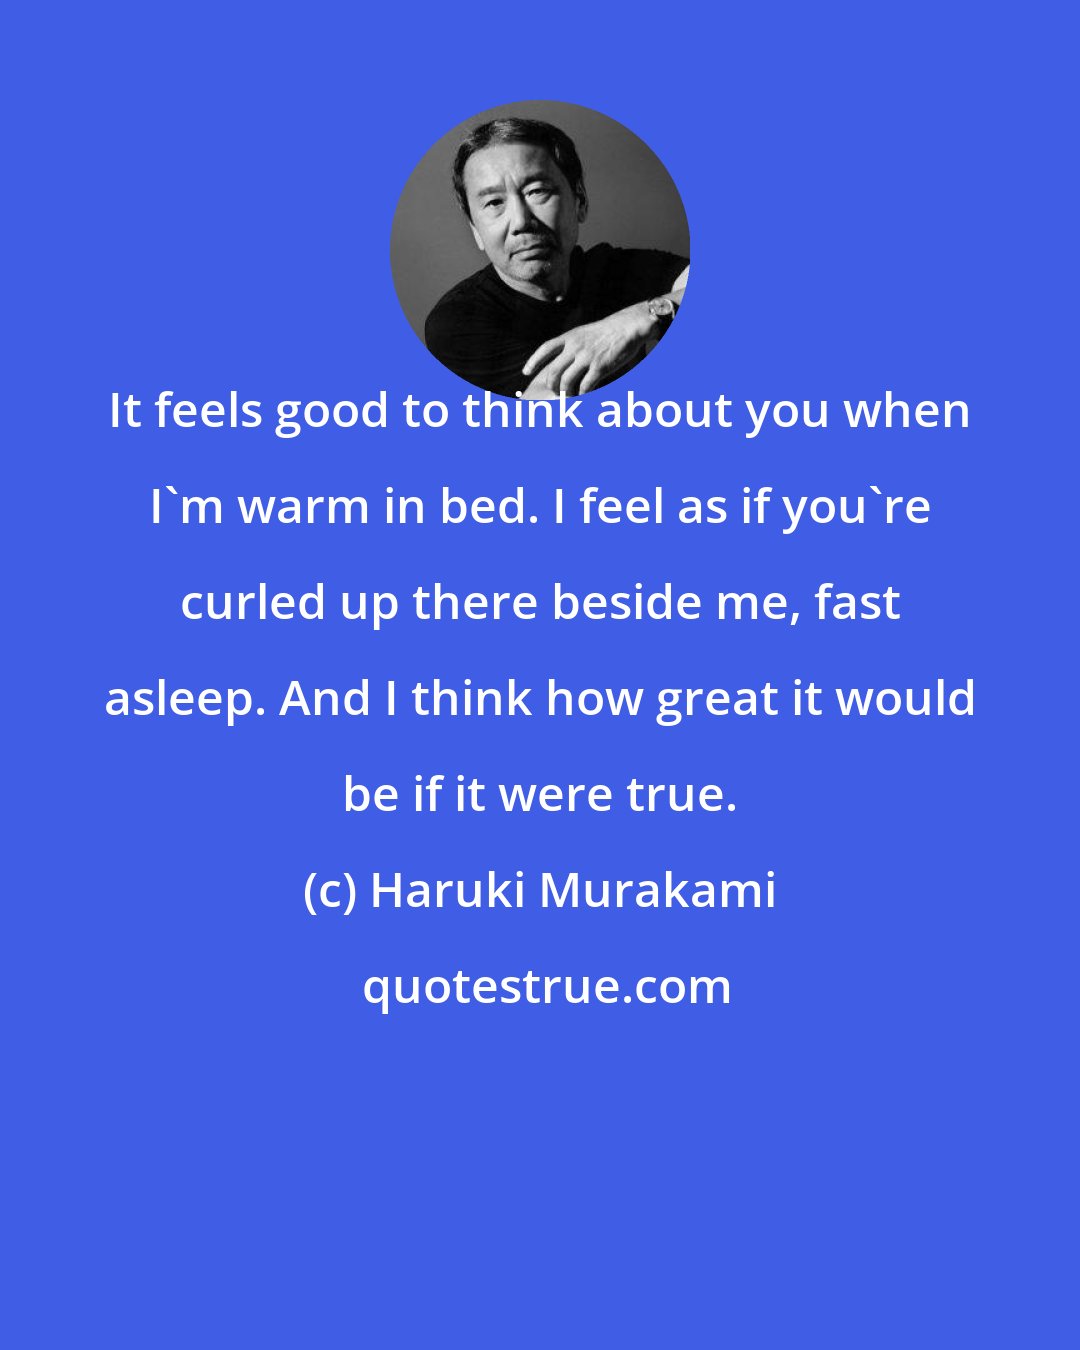 Haruki Murakami: It feels good to think about you when I'm warm in bed. I feel as if you're curled up there beside me, fast asleep. And I think how great it would be if it were true.